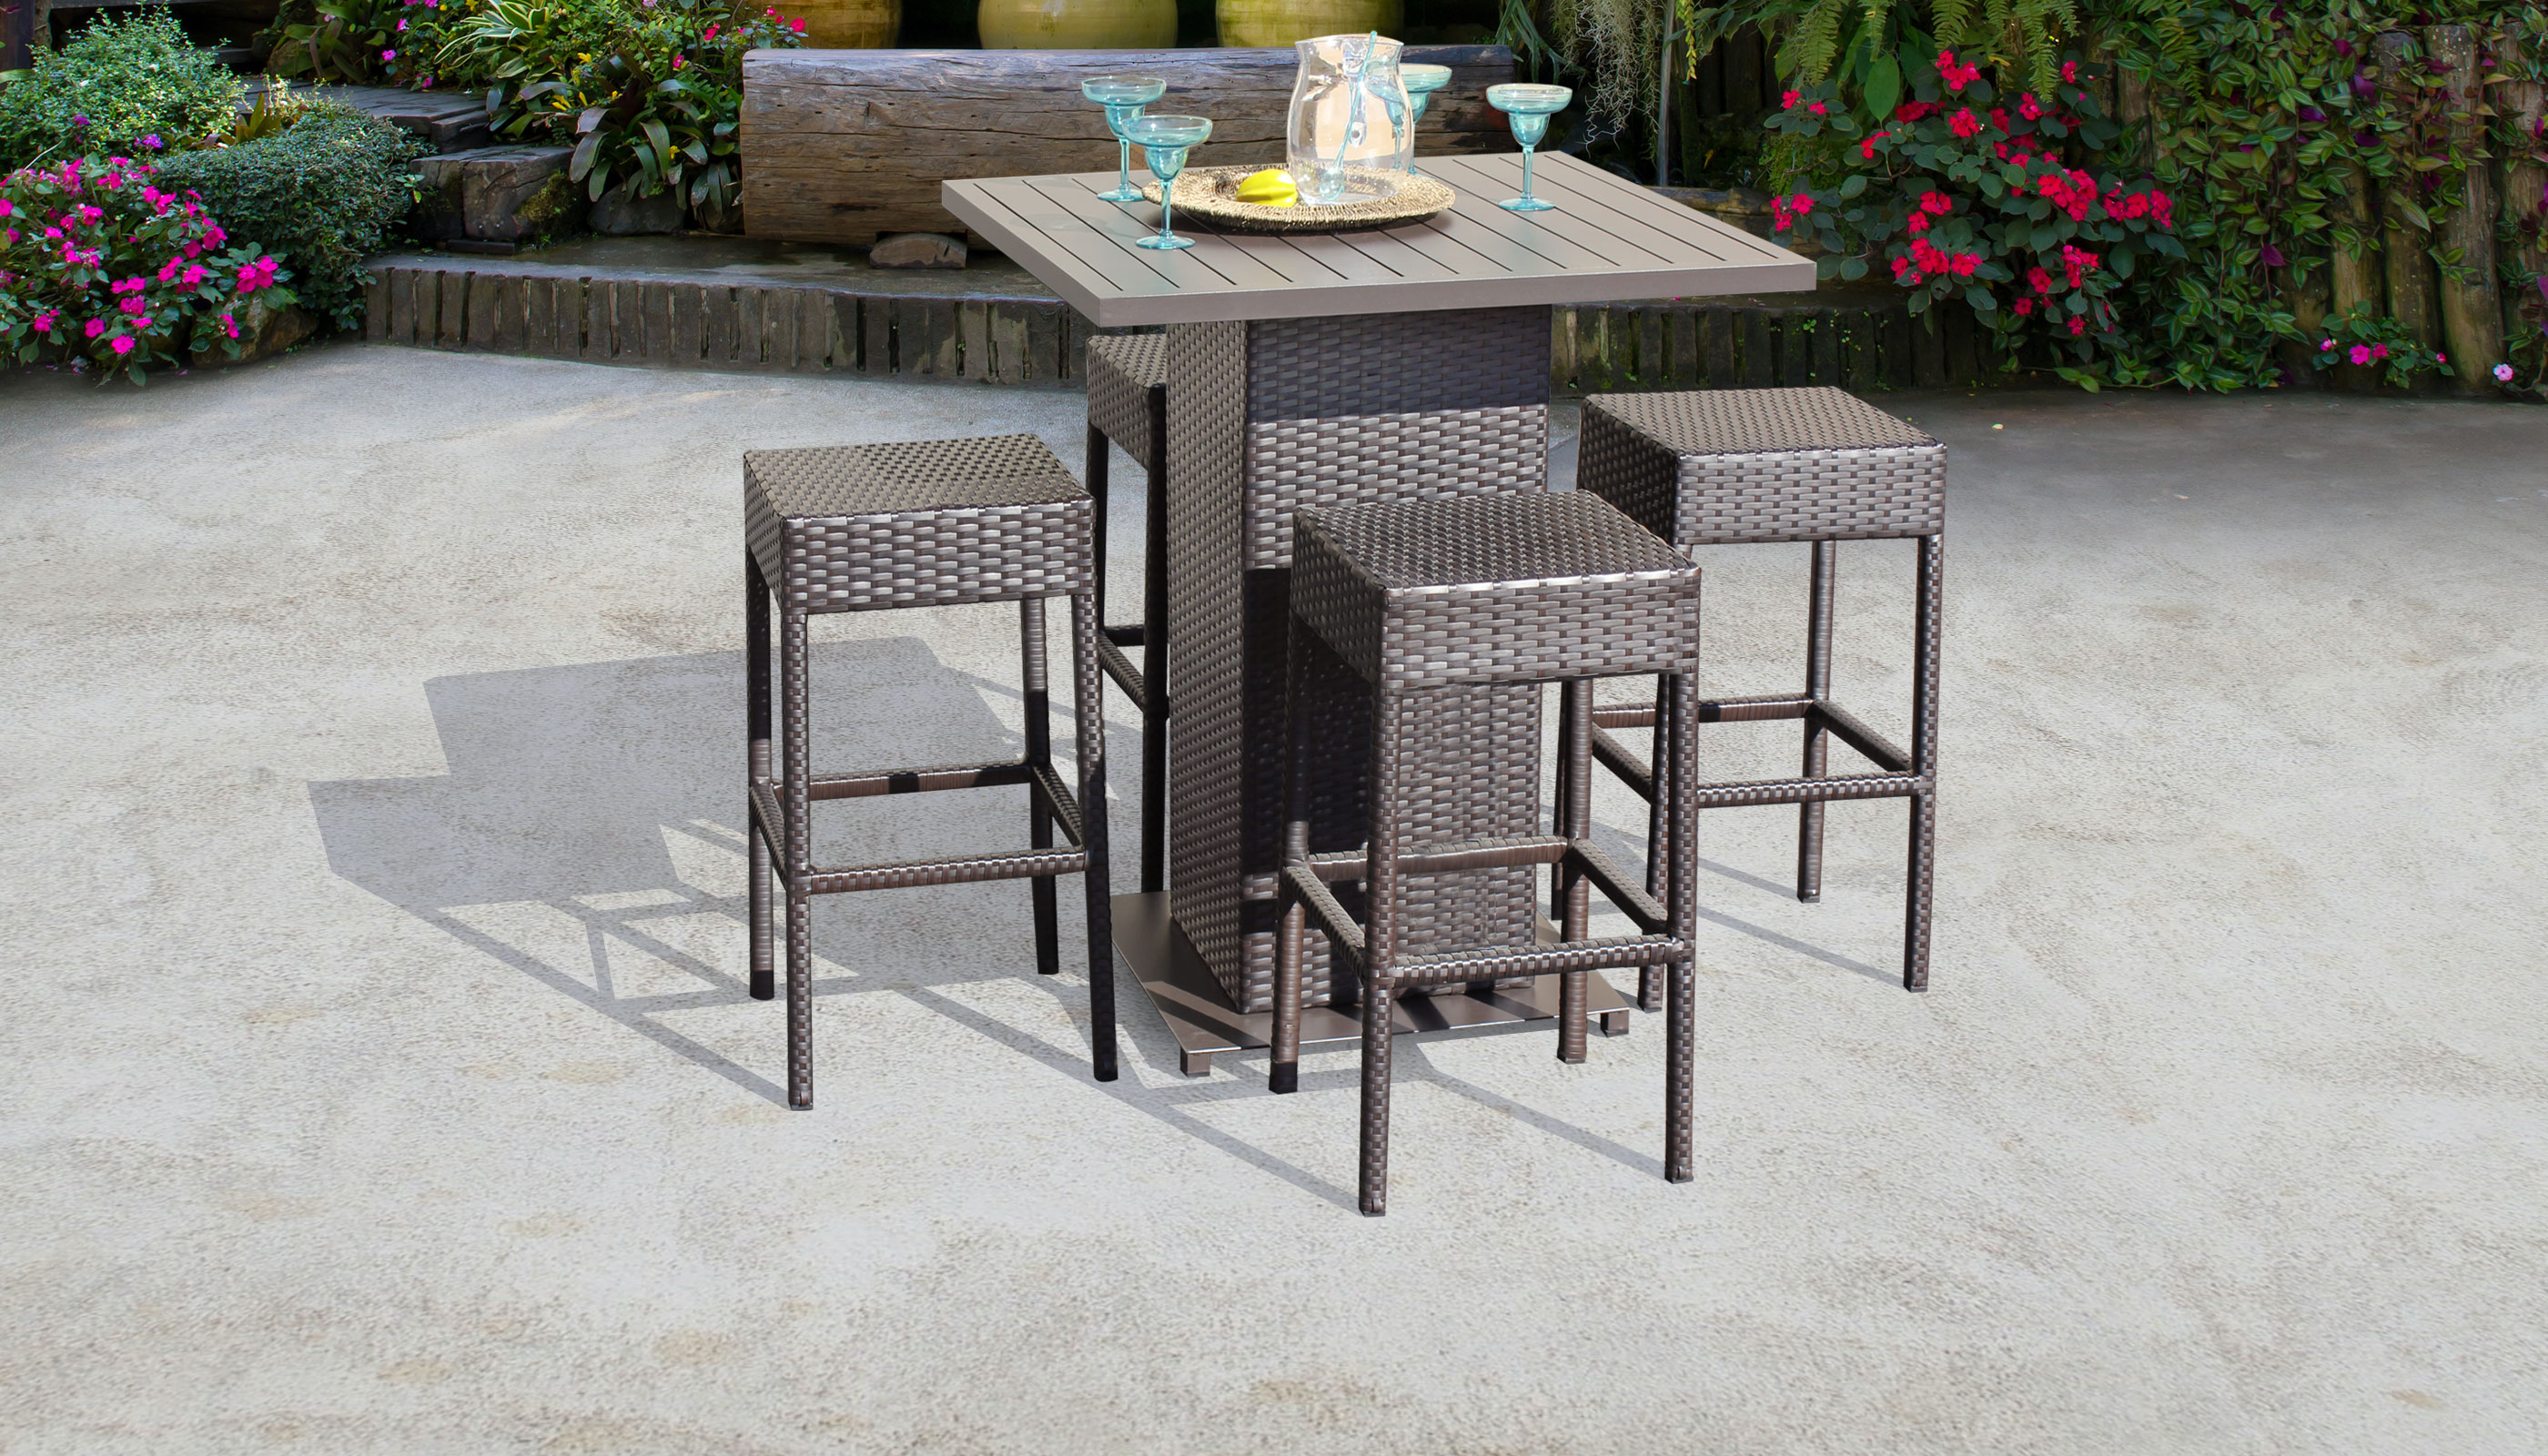 Espresso TK Classics WITHBACK-4 Barbados Pub Table Set with Barstools 5 Piece Outdoor Wicker Patio Bar Furniture 